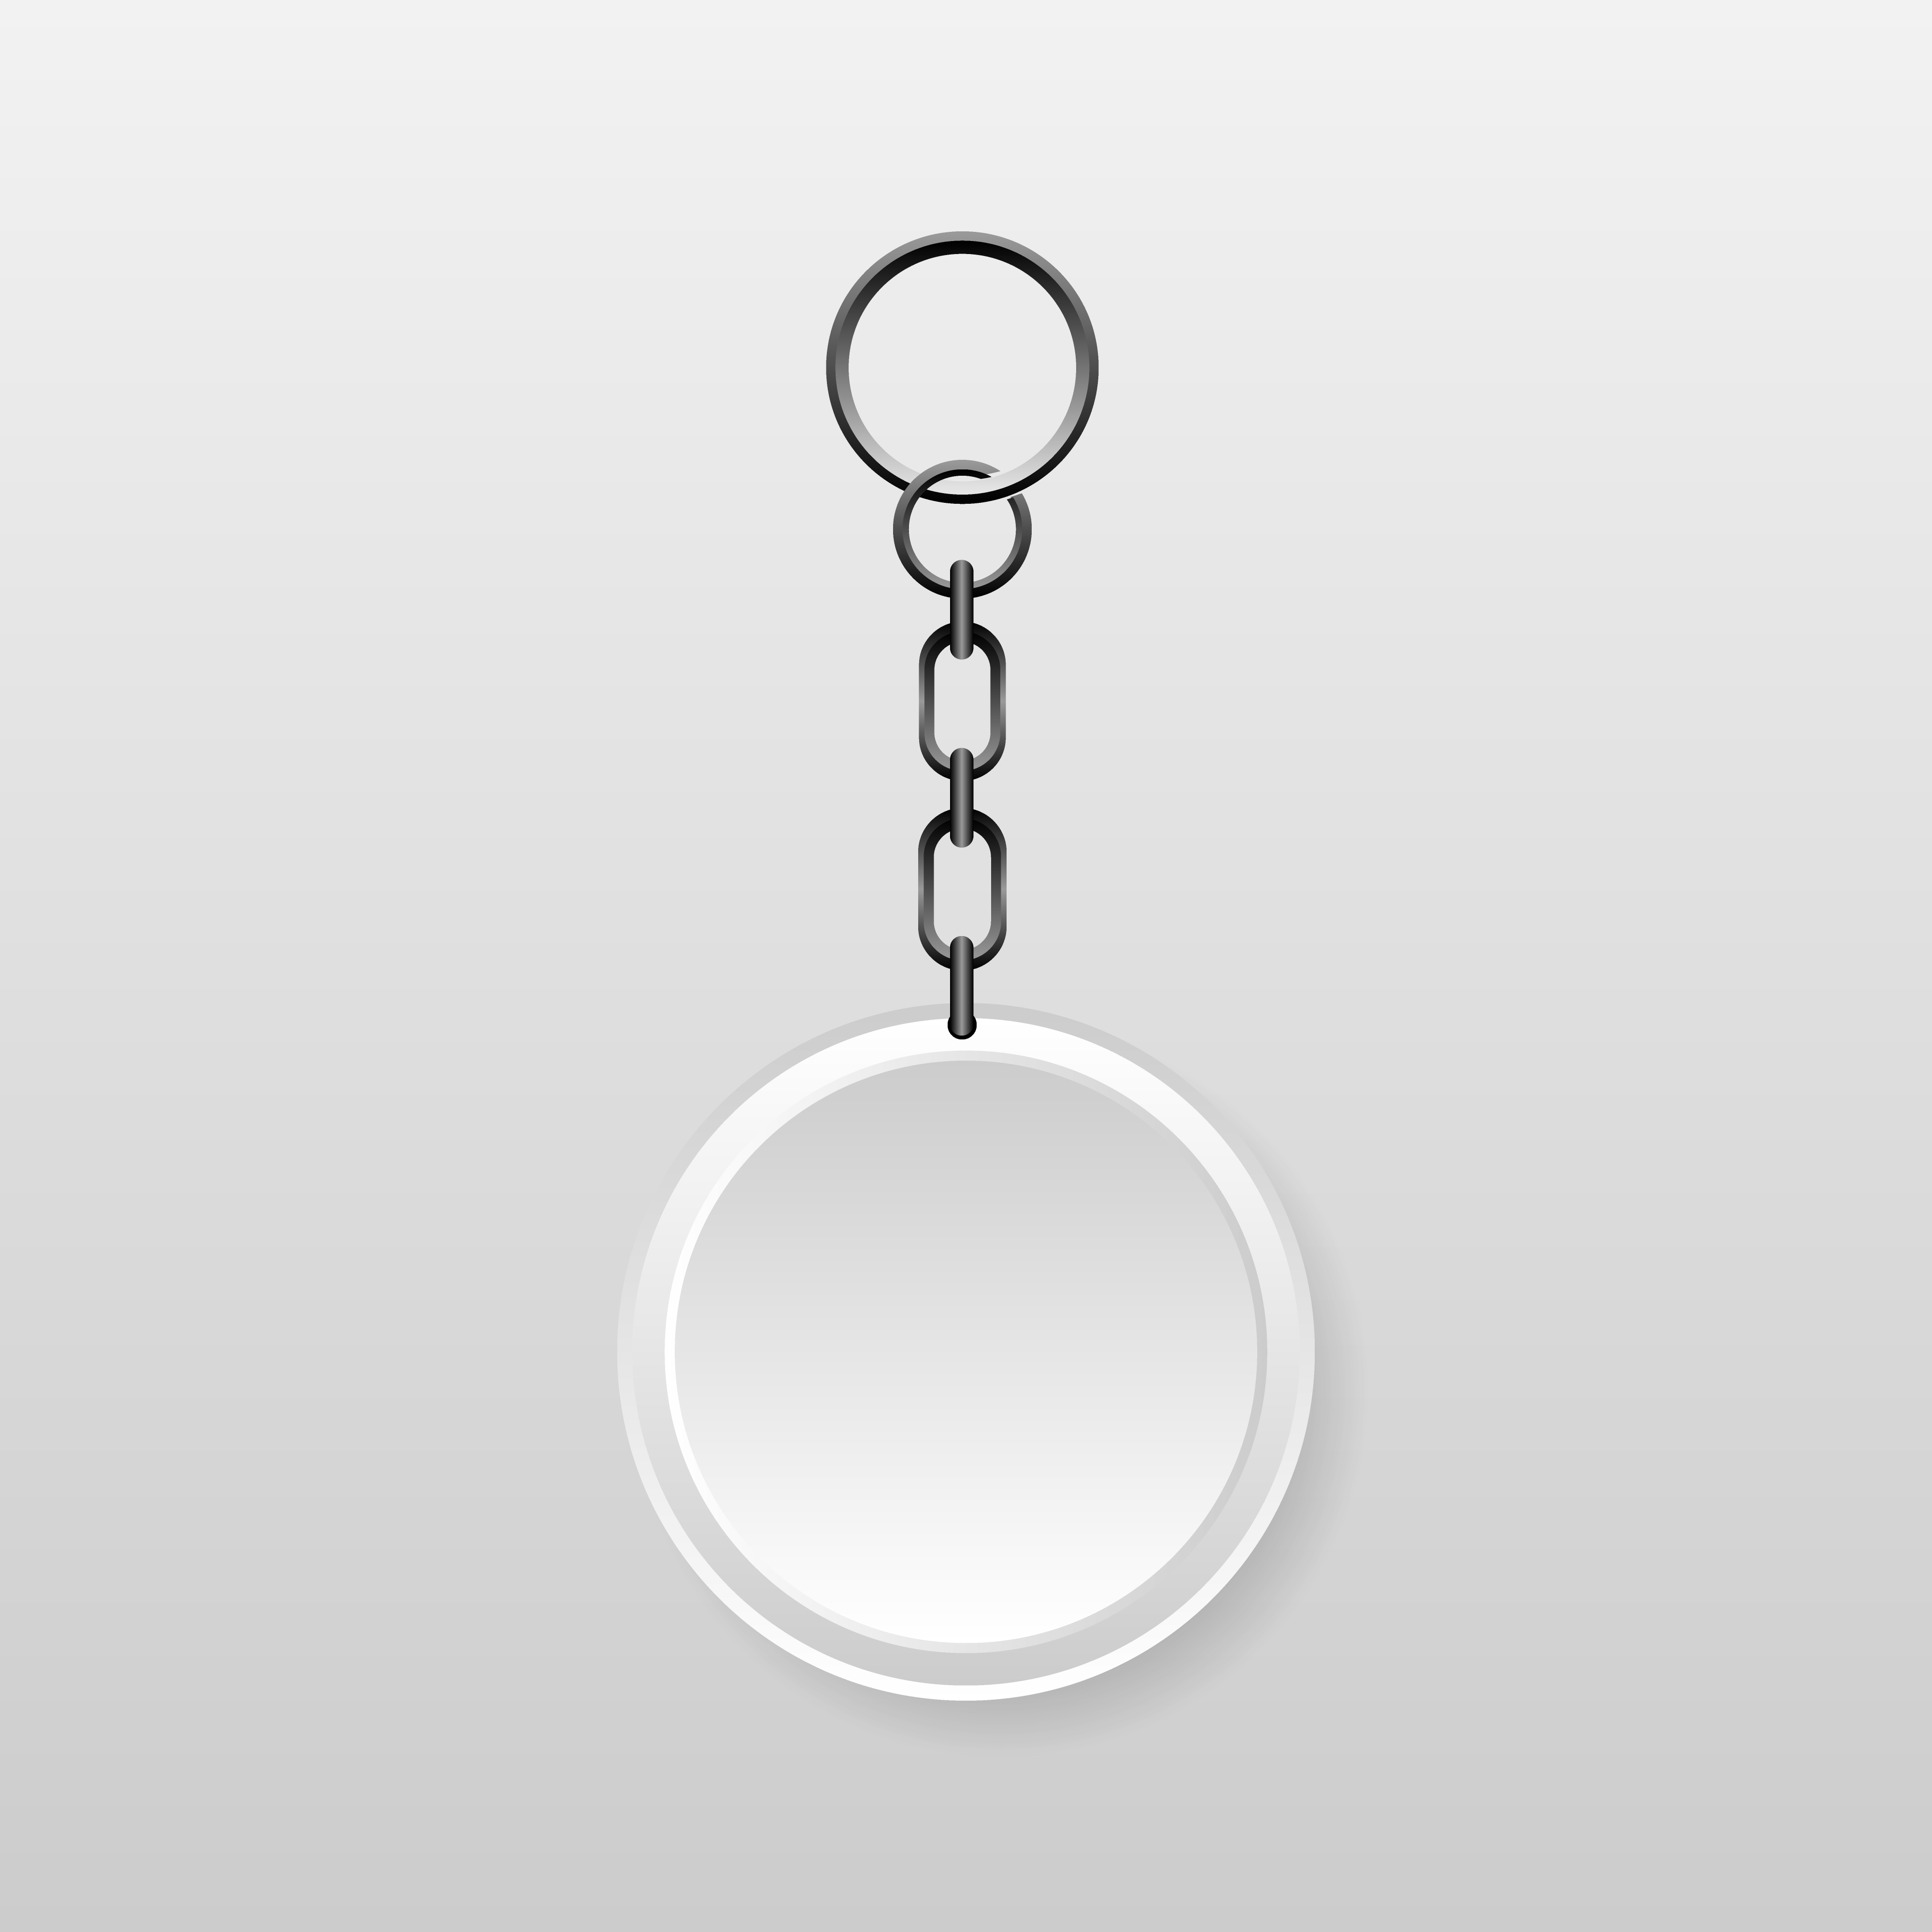 Download Keychain Mockup Vector Art Icons And Graphics For Free Download